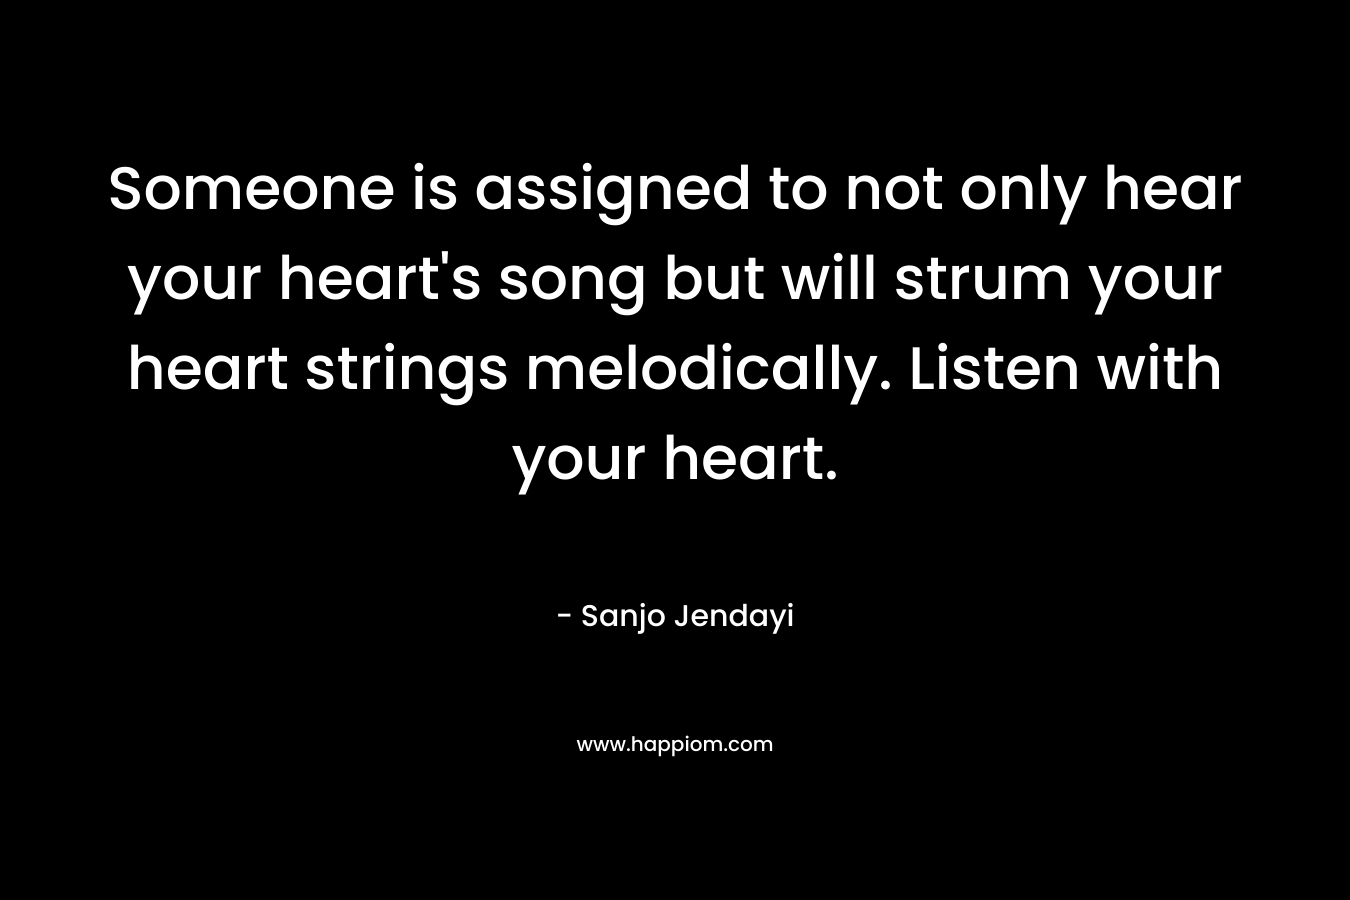 Someone is assigned to not only hear your heart's song but will strum your heart strings melodically. Listen with your heart.